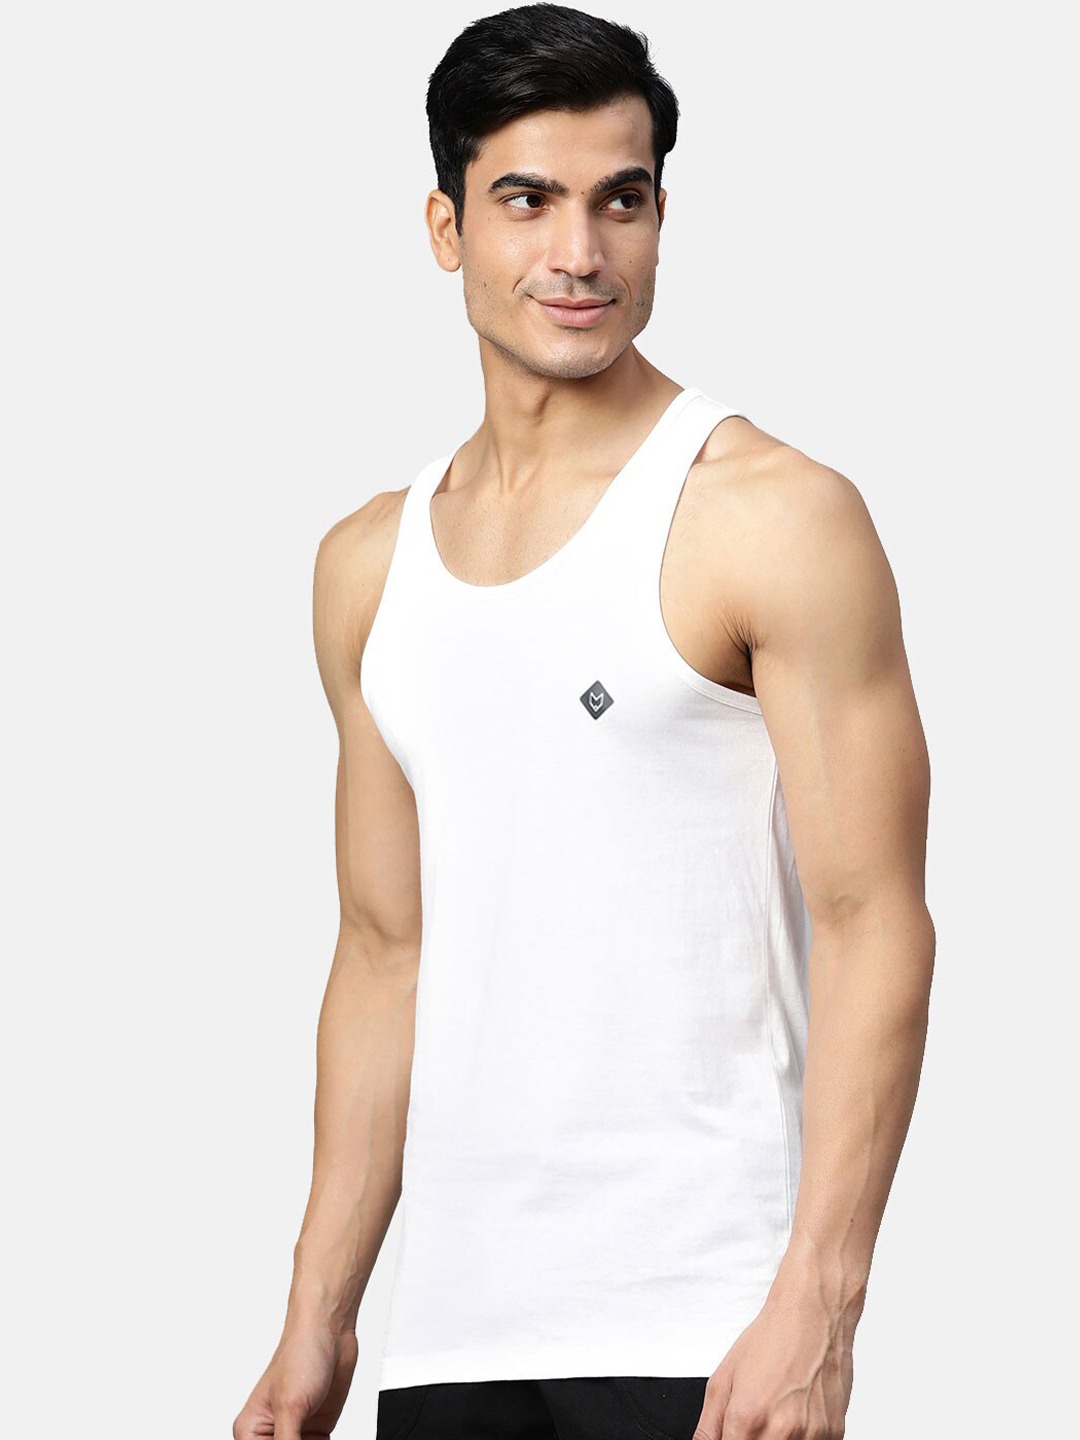 Clothing Innerwear Vests | Almo Wear Men Pack Of 3 White Solid Slim-Fit Cotton Innerwear Vests - YV93001